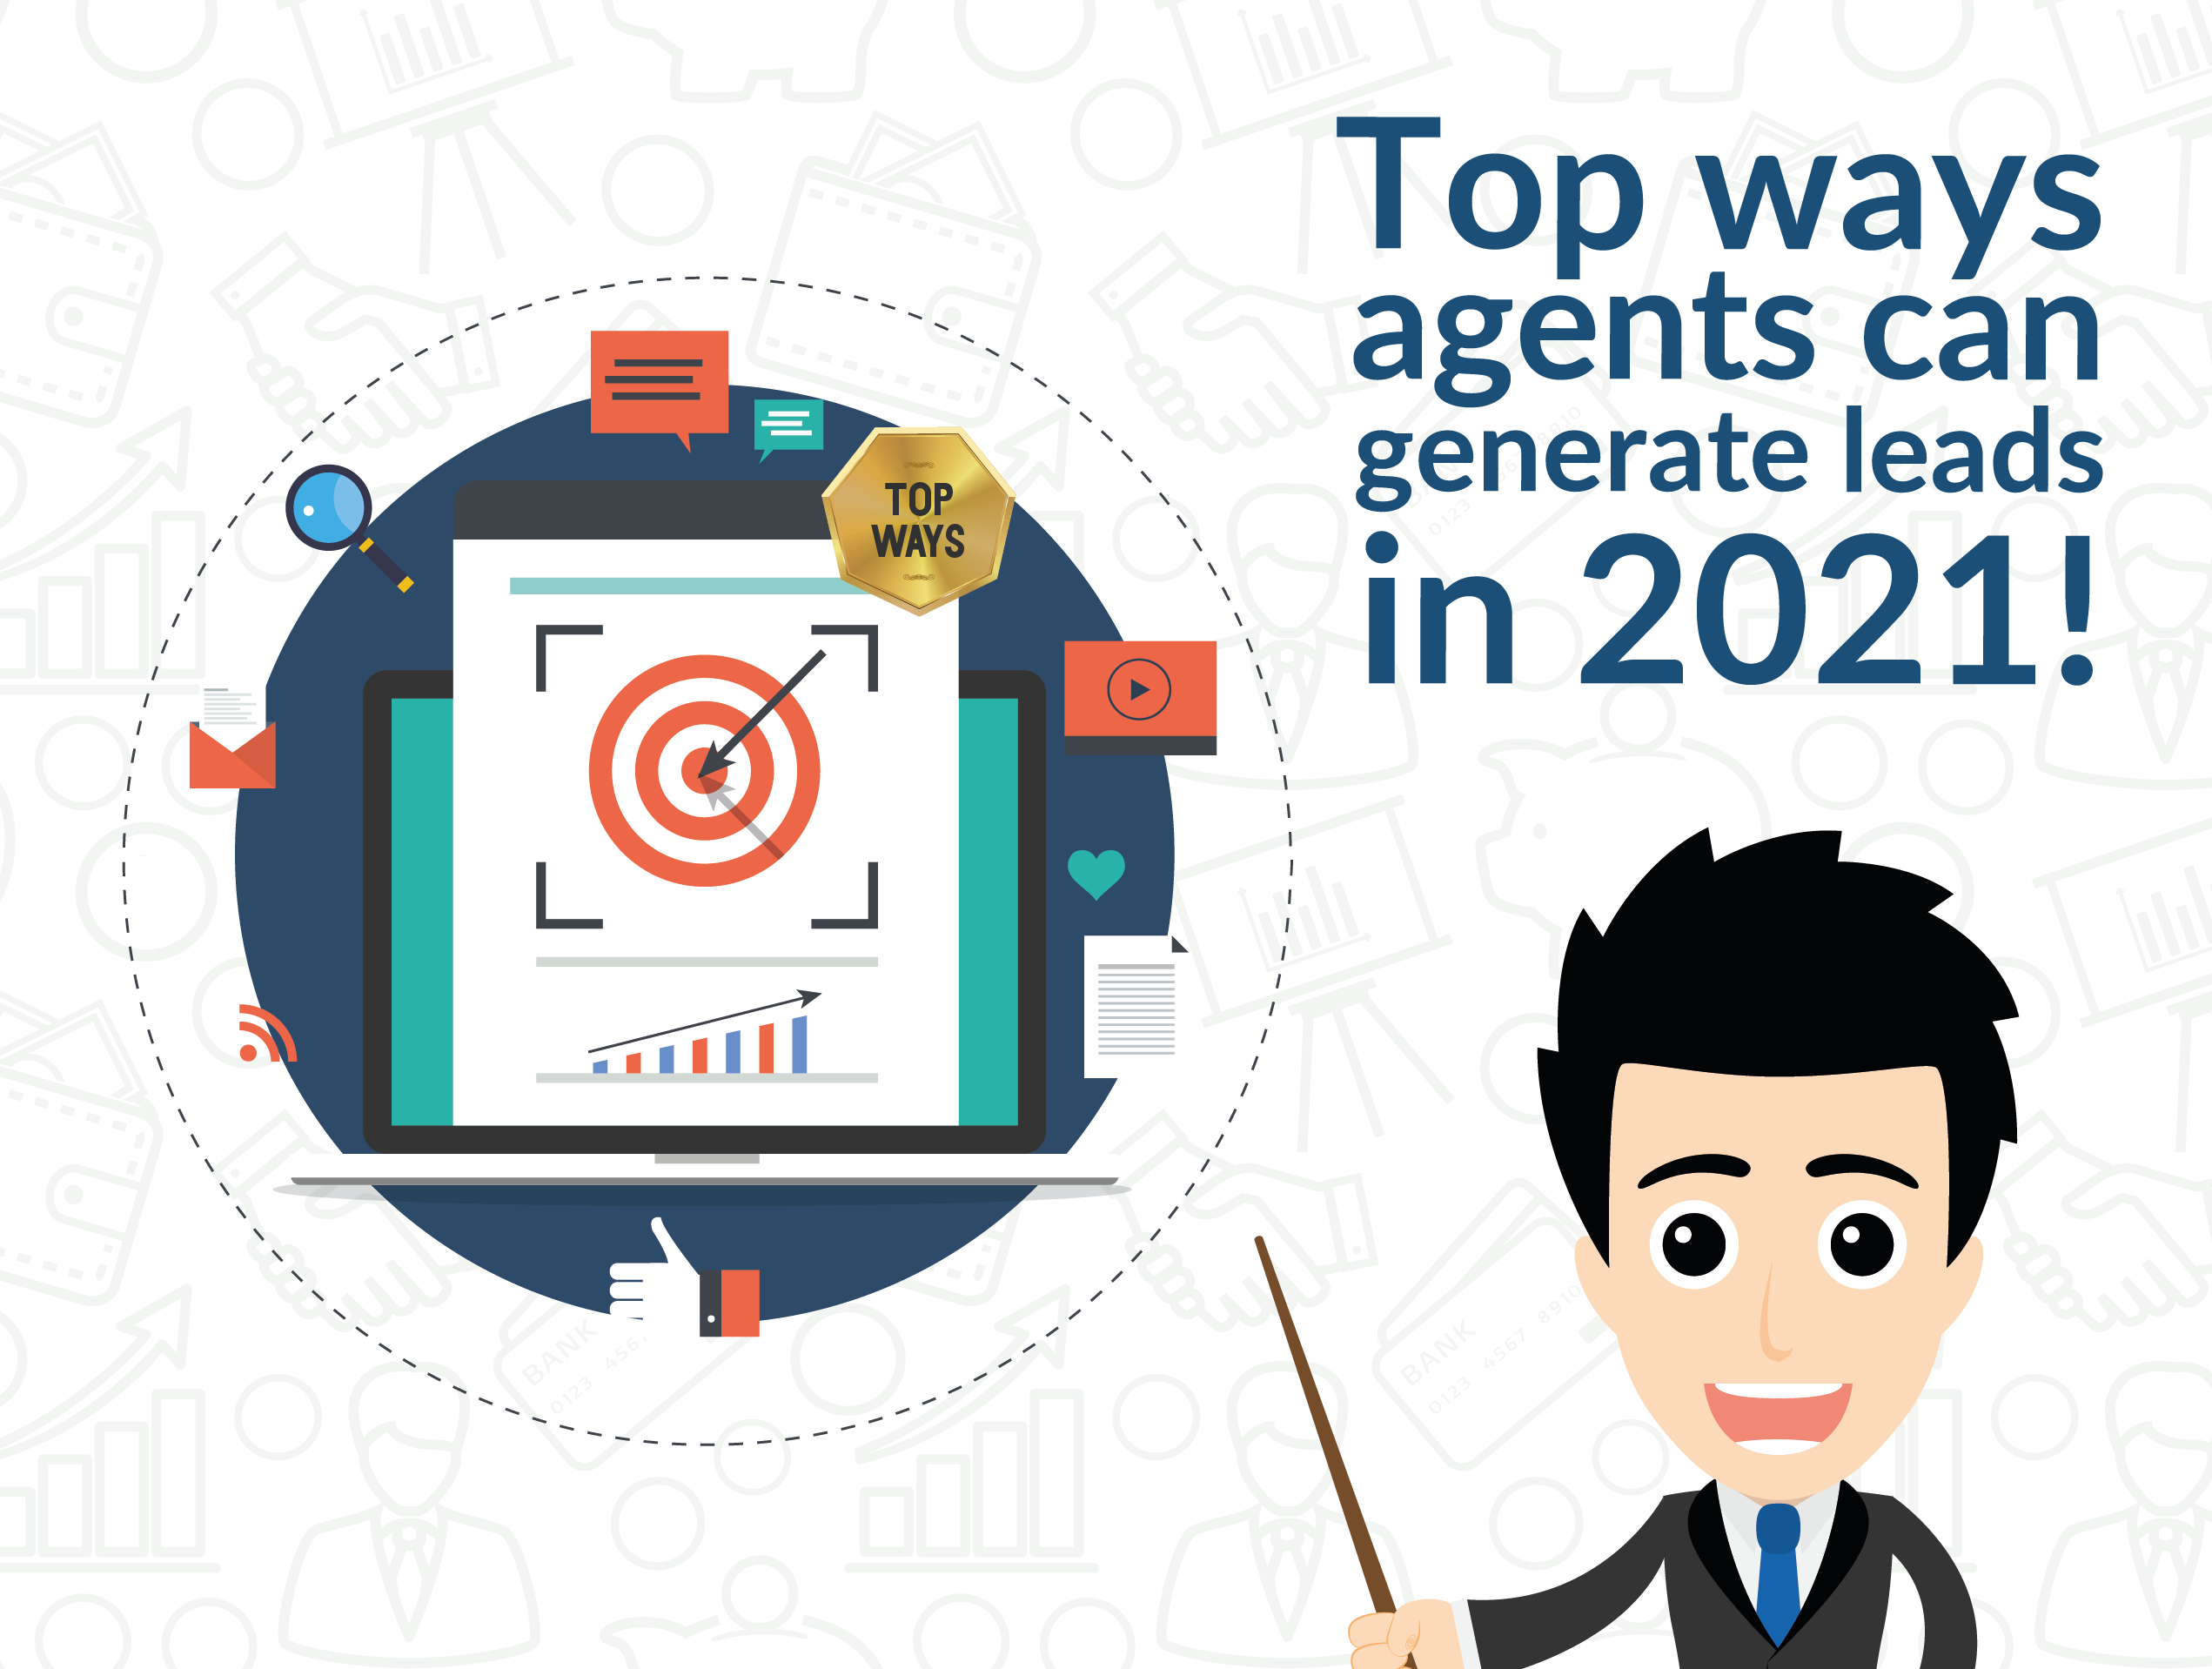 Revealed: top ways agents can generate leads in 2021